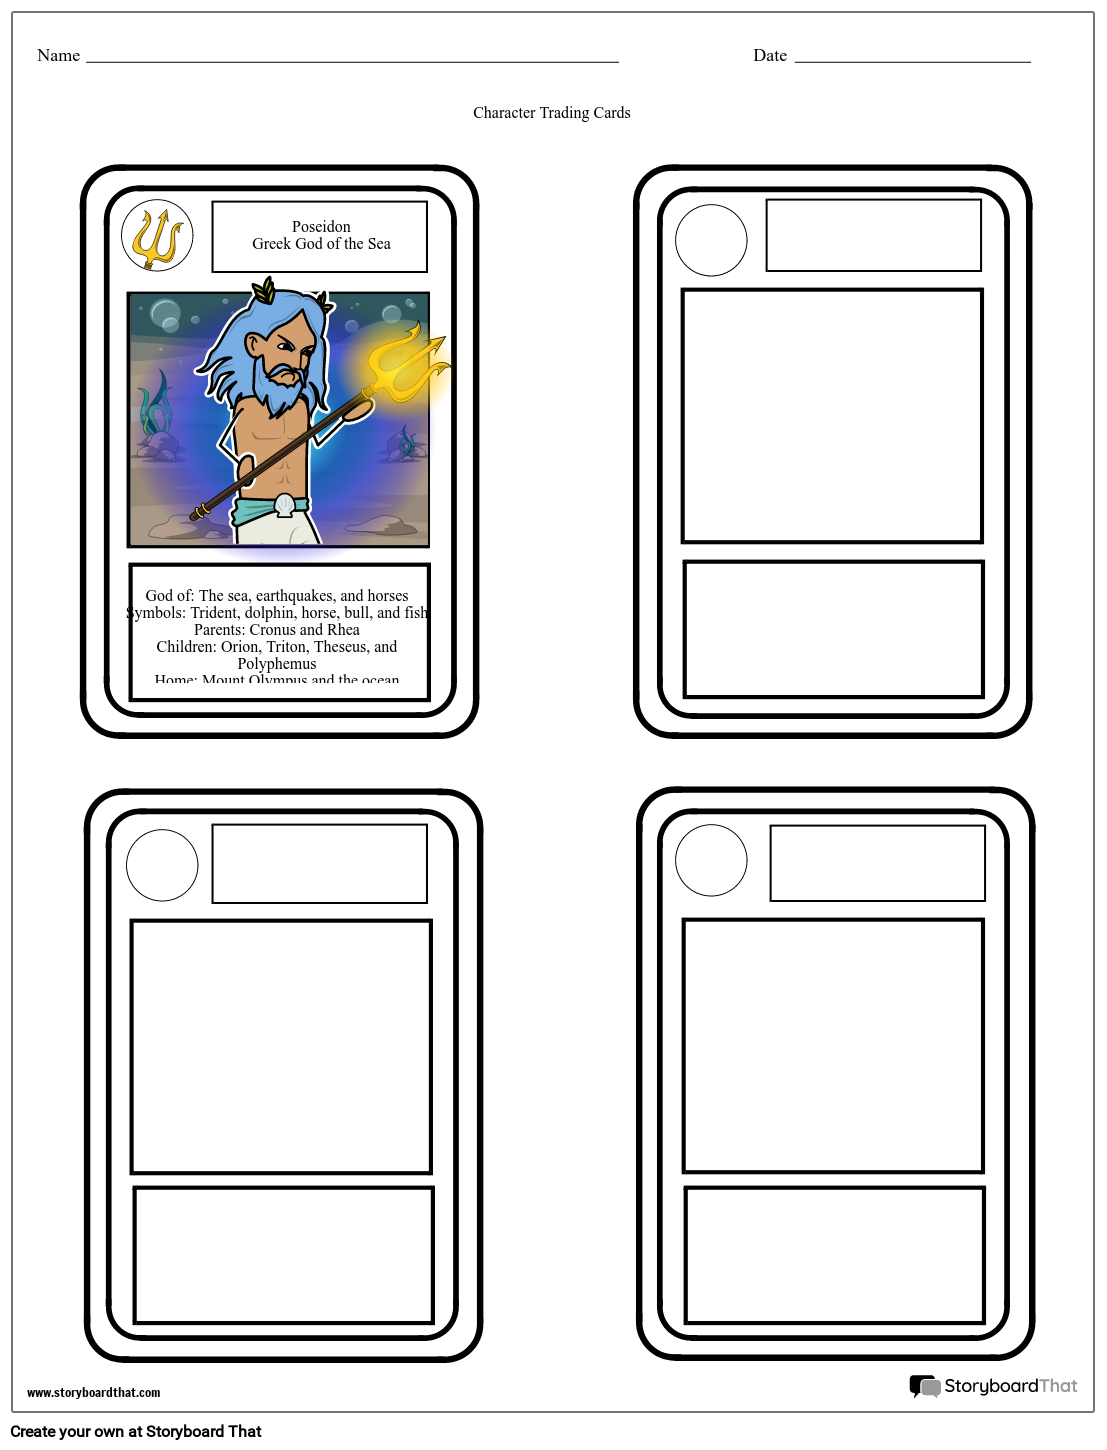 Trading Card With Example Storyboard By Worksheet templates